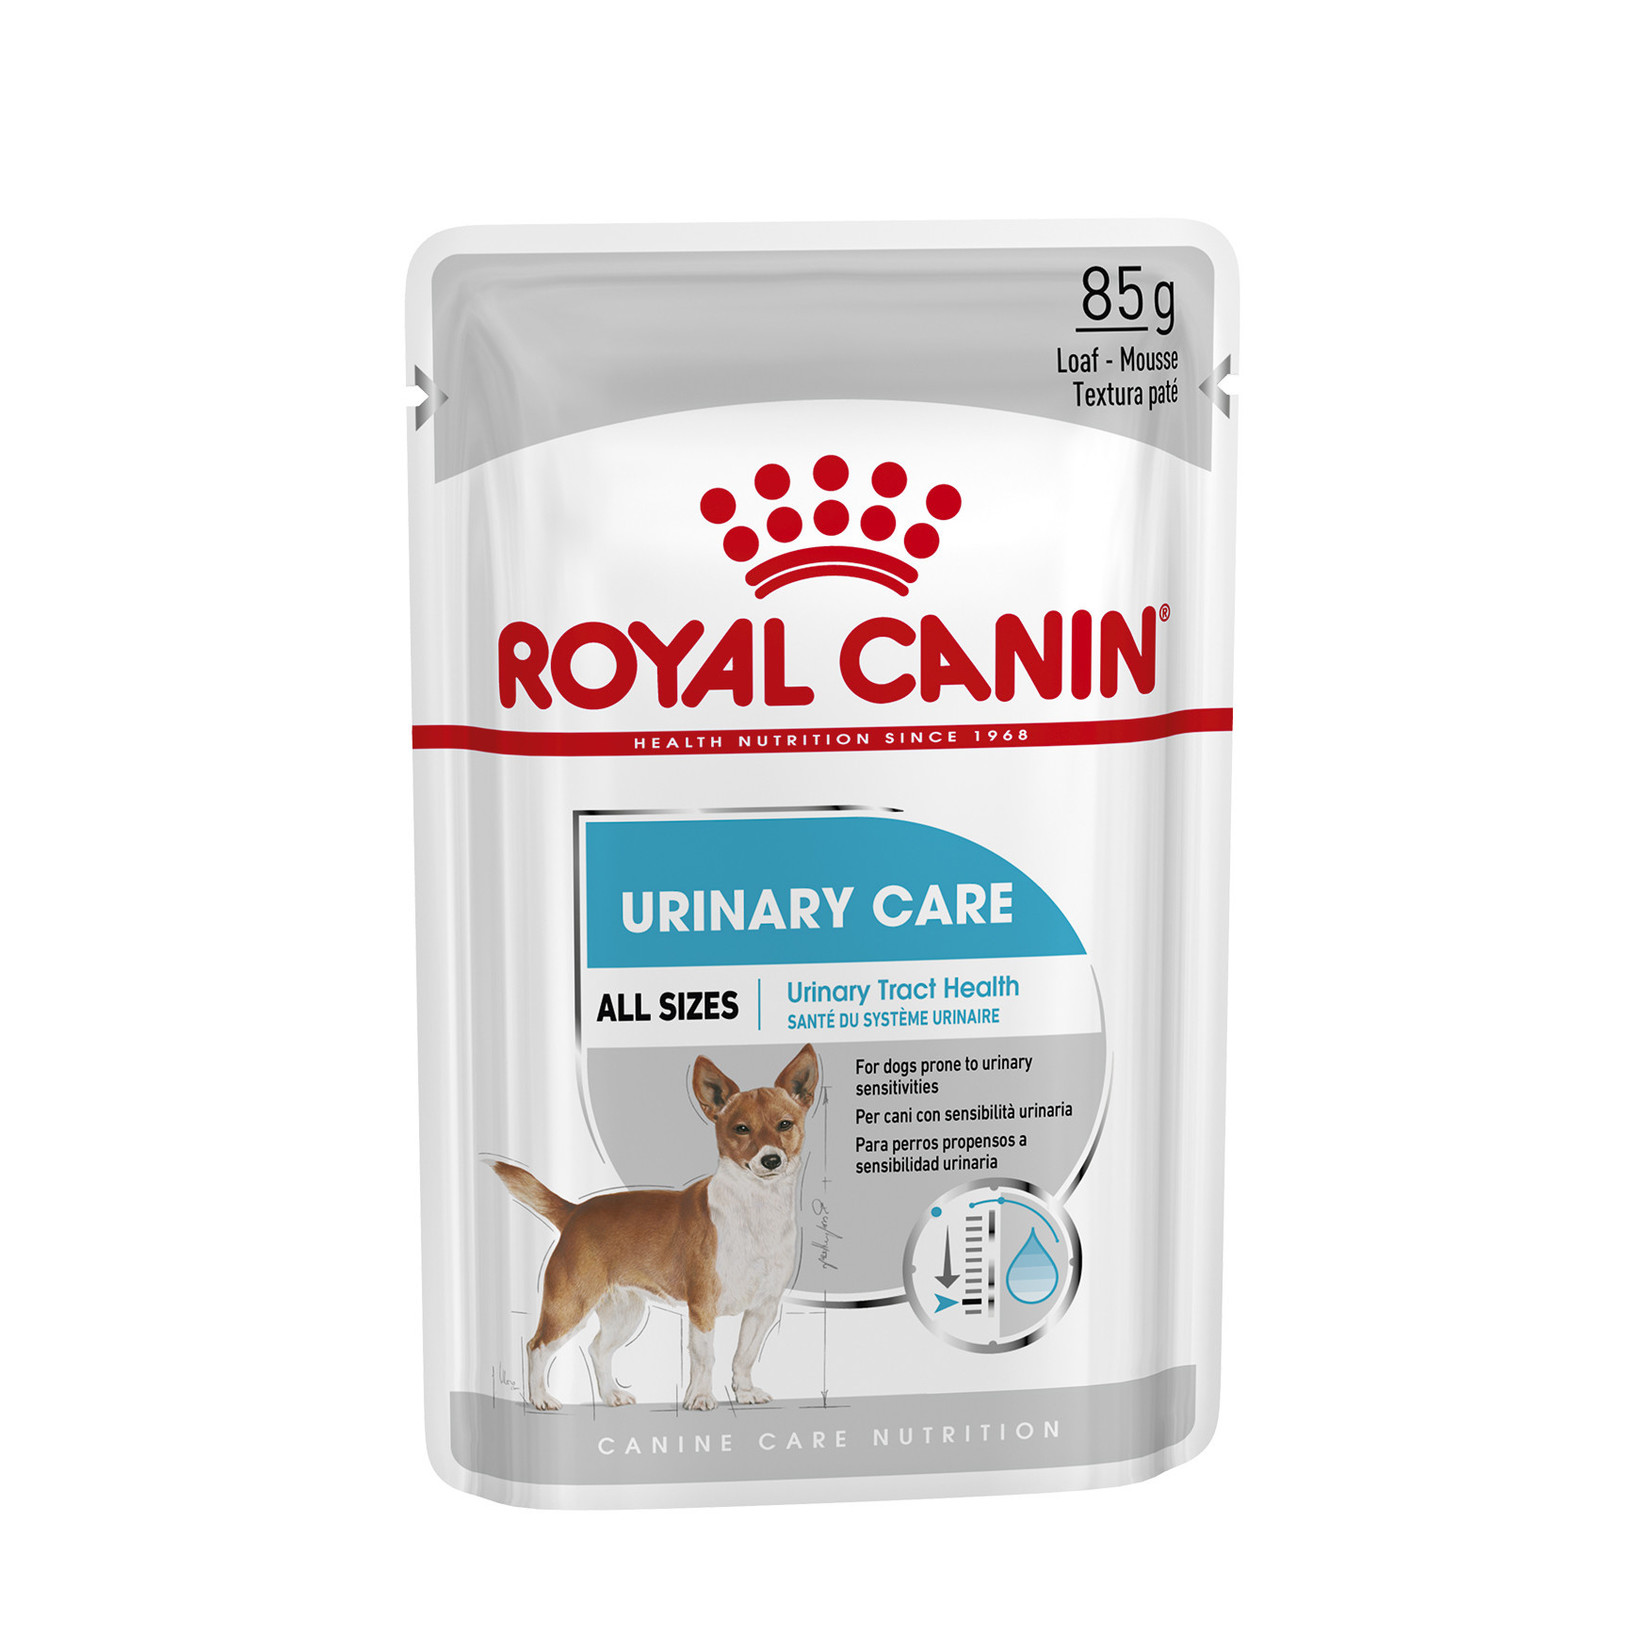 Royal Canin Urinary Care Adult Dog Wet Food Loaf Pouch, 85g, box of 12